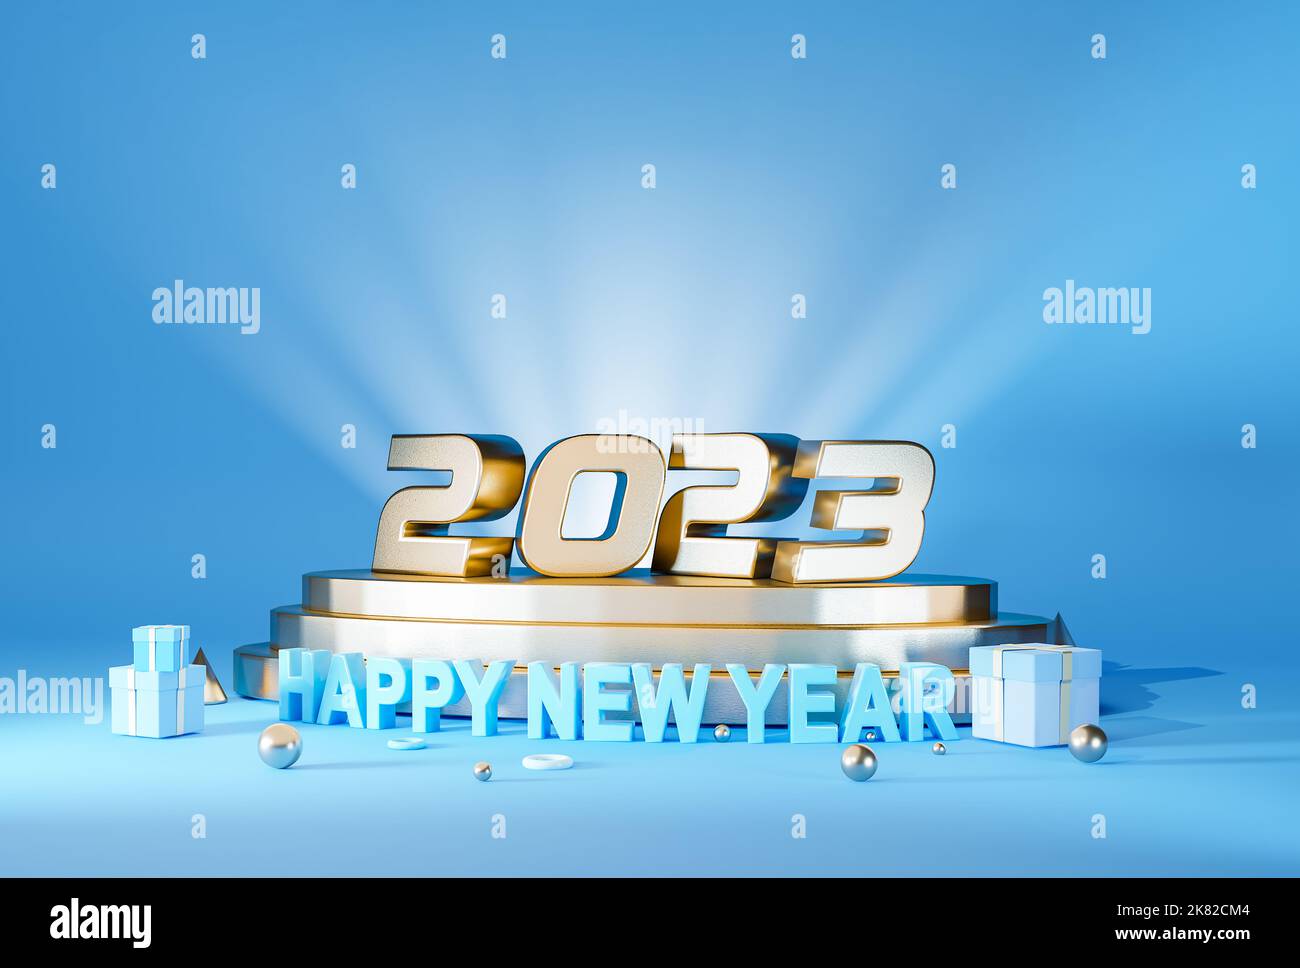 Happy new year 2023 Design, 3d type blue color new year background with golden letters Stock Photo